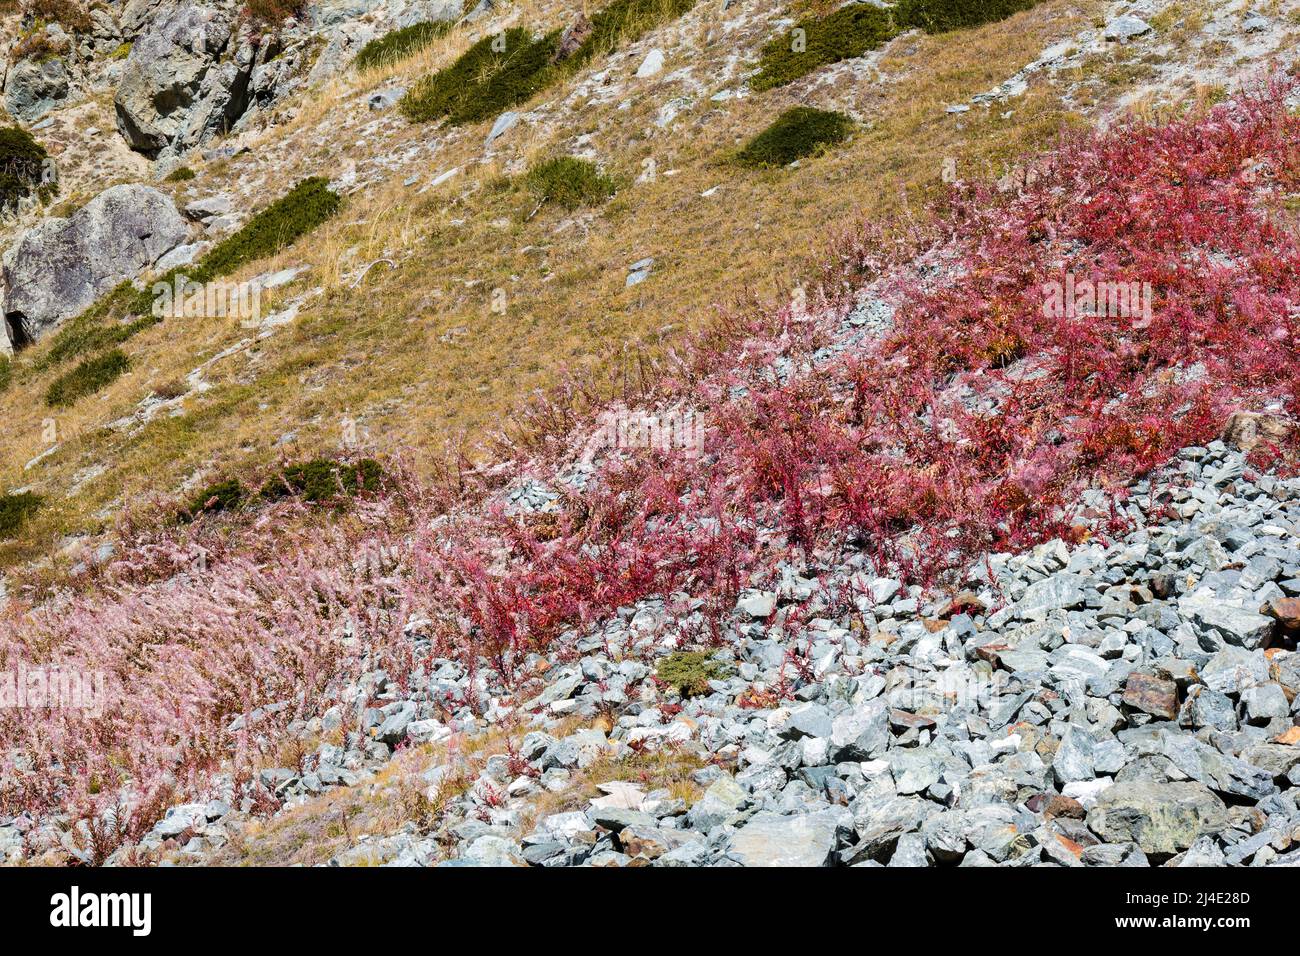 Alps mountain slope with colorful vegetations and fireweed in autumn red Stock Photo